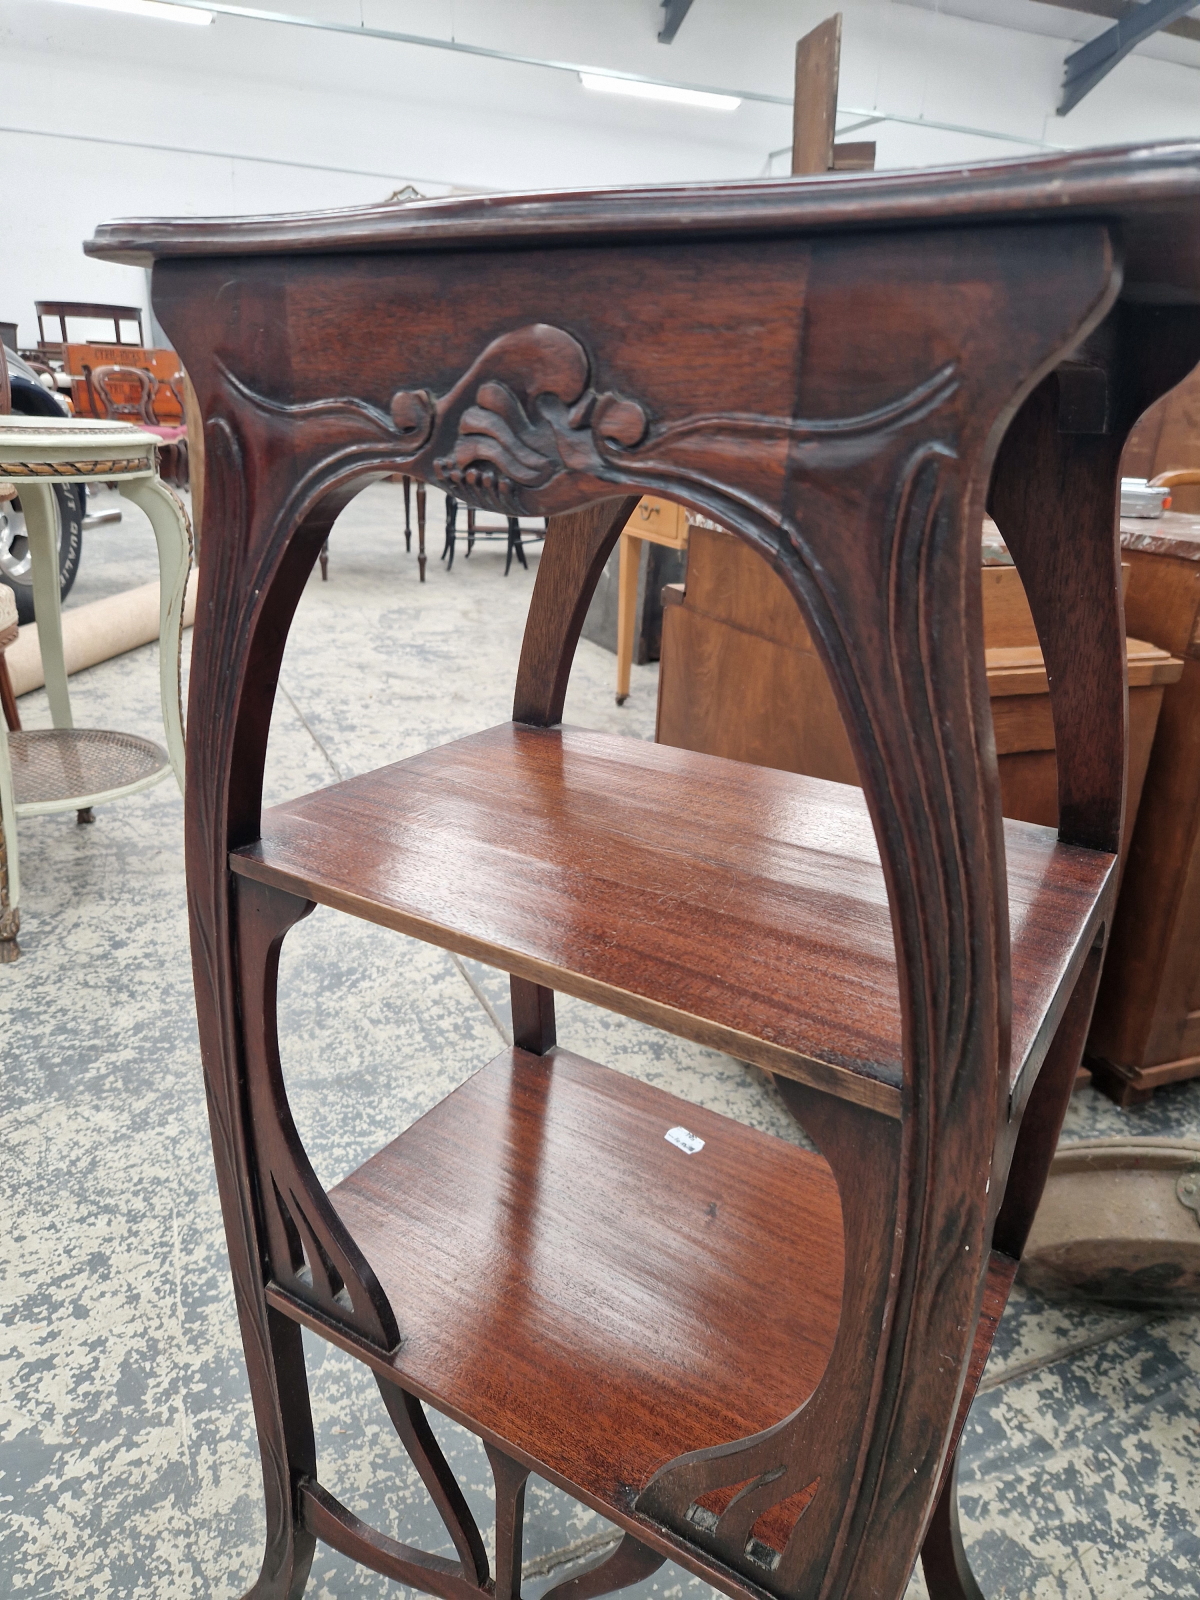 AN ART NOUVEAU MAHOGANY SIDE TABLE, THE TWO SHELVES BELOW THE TOP FRAMED BY SERPENTINE LEGS - Image 3 of 4